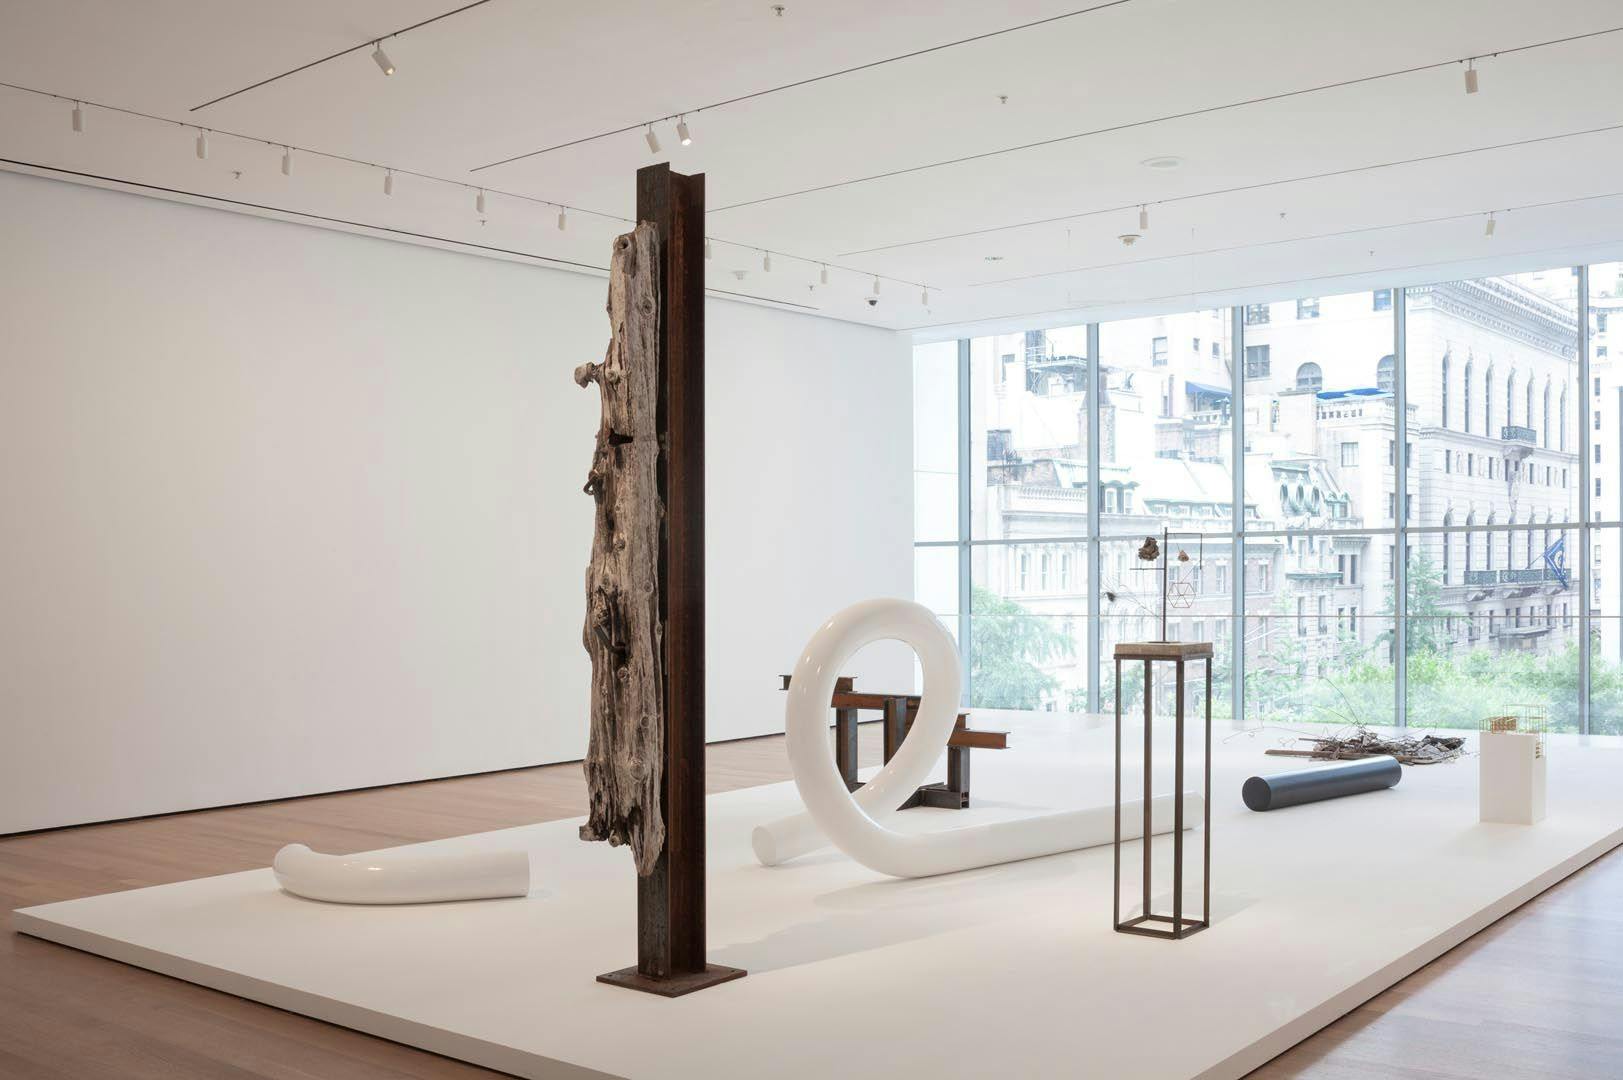 Installation view of the exhibition titled The Equinox¬†at The Museum of Modern Art in New York, dated 2013 to 2014.